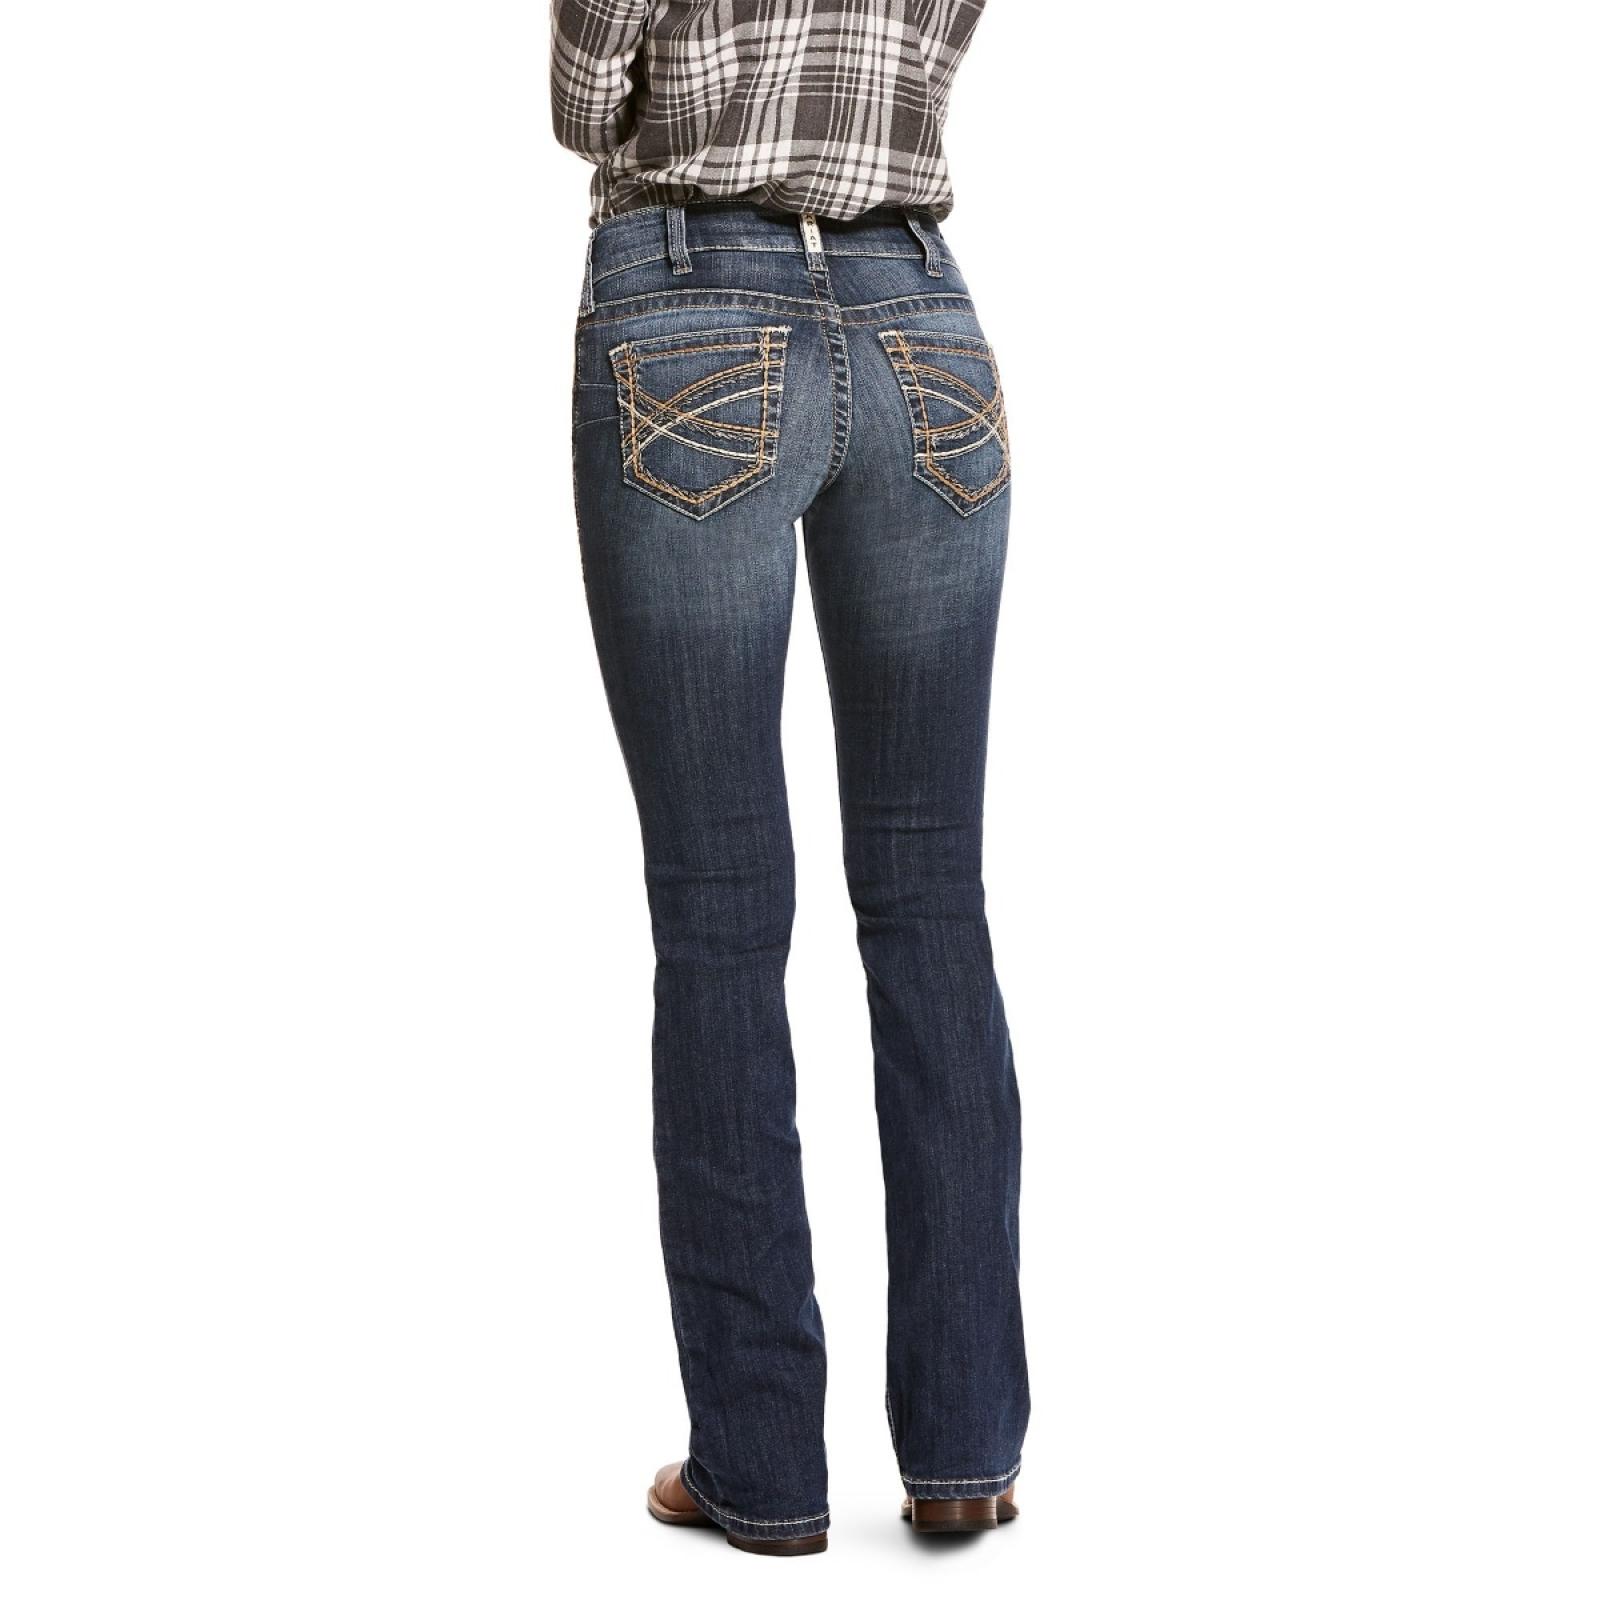 Ariat R.E.A.L. Mid Rise Stretch Entwined Festival Boot Cut Jean